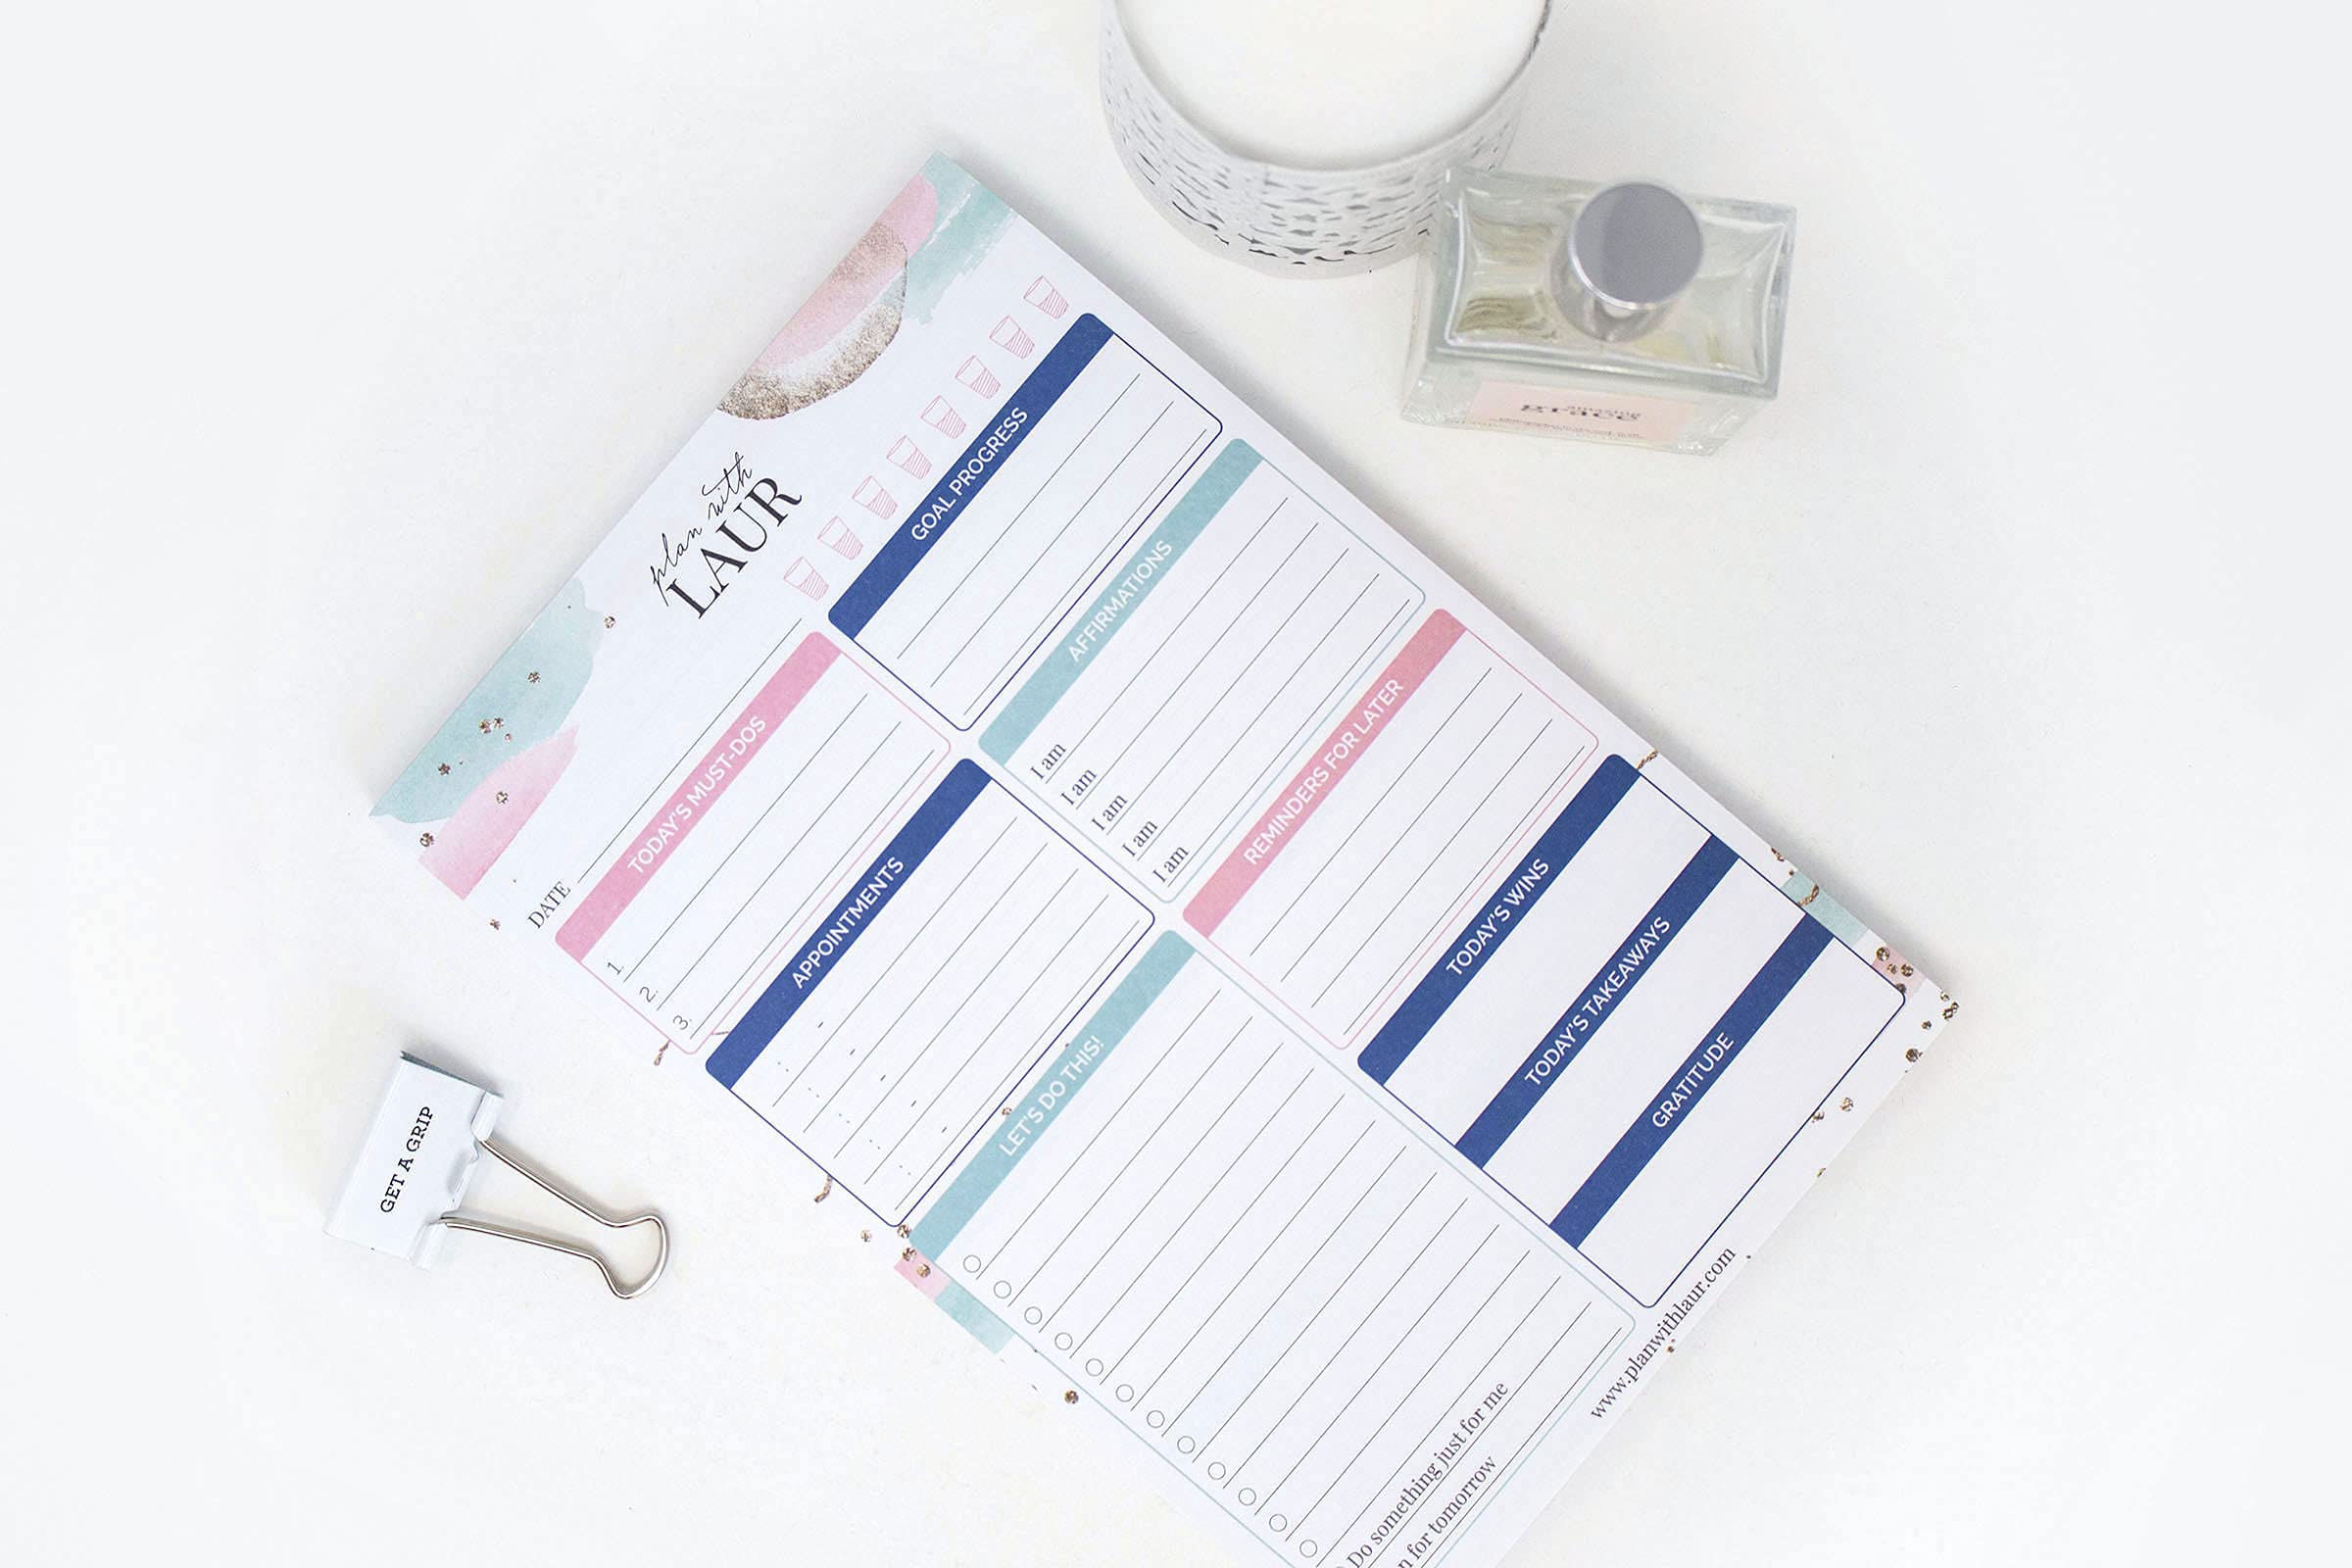 bloom daily planners Double Sided Daily Planning System Tear Off to-Do Pad - Undated Checklist Notepad Organizer with Perforated Sheets - 6" x 9" - Plan With Laur